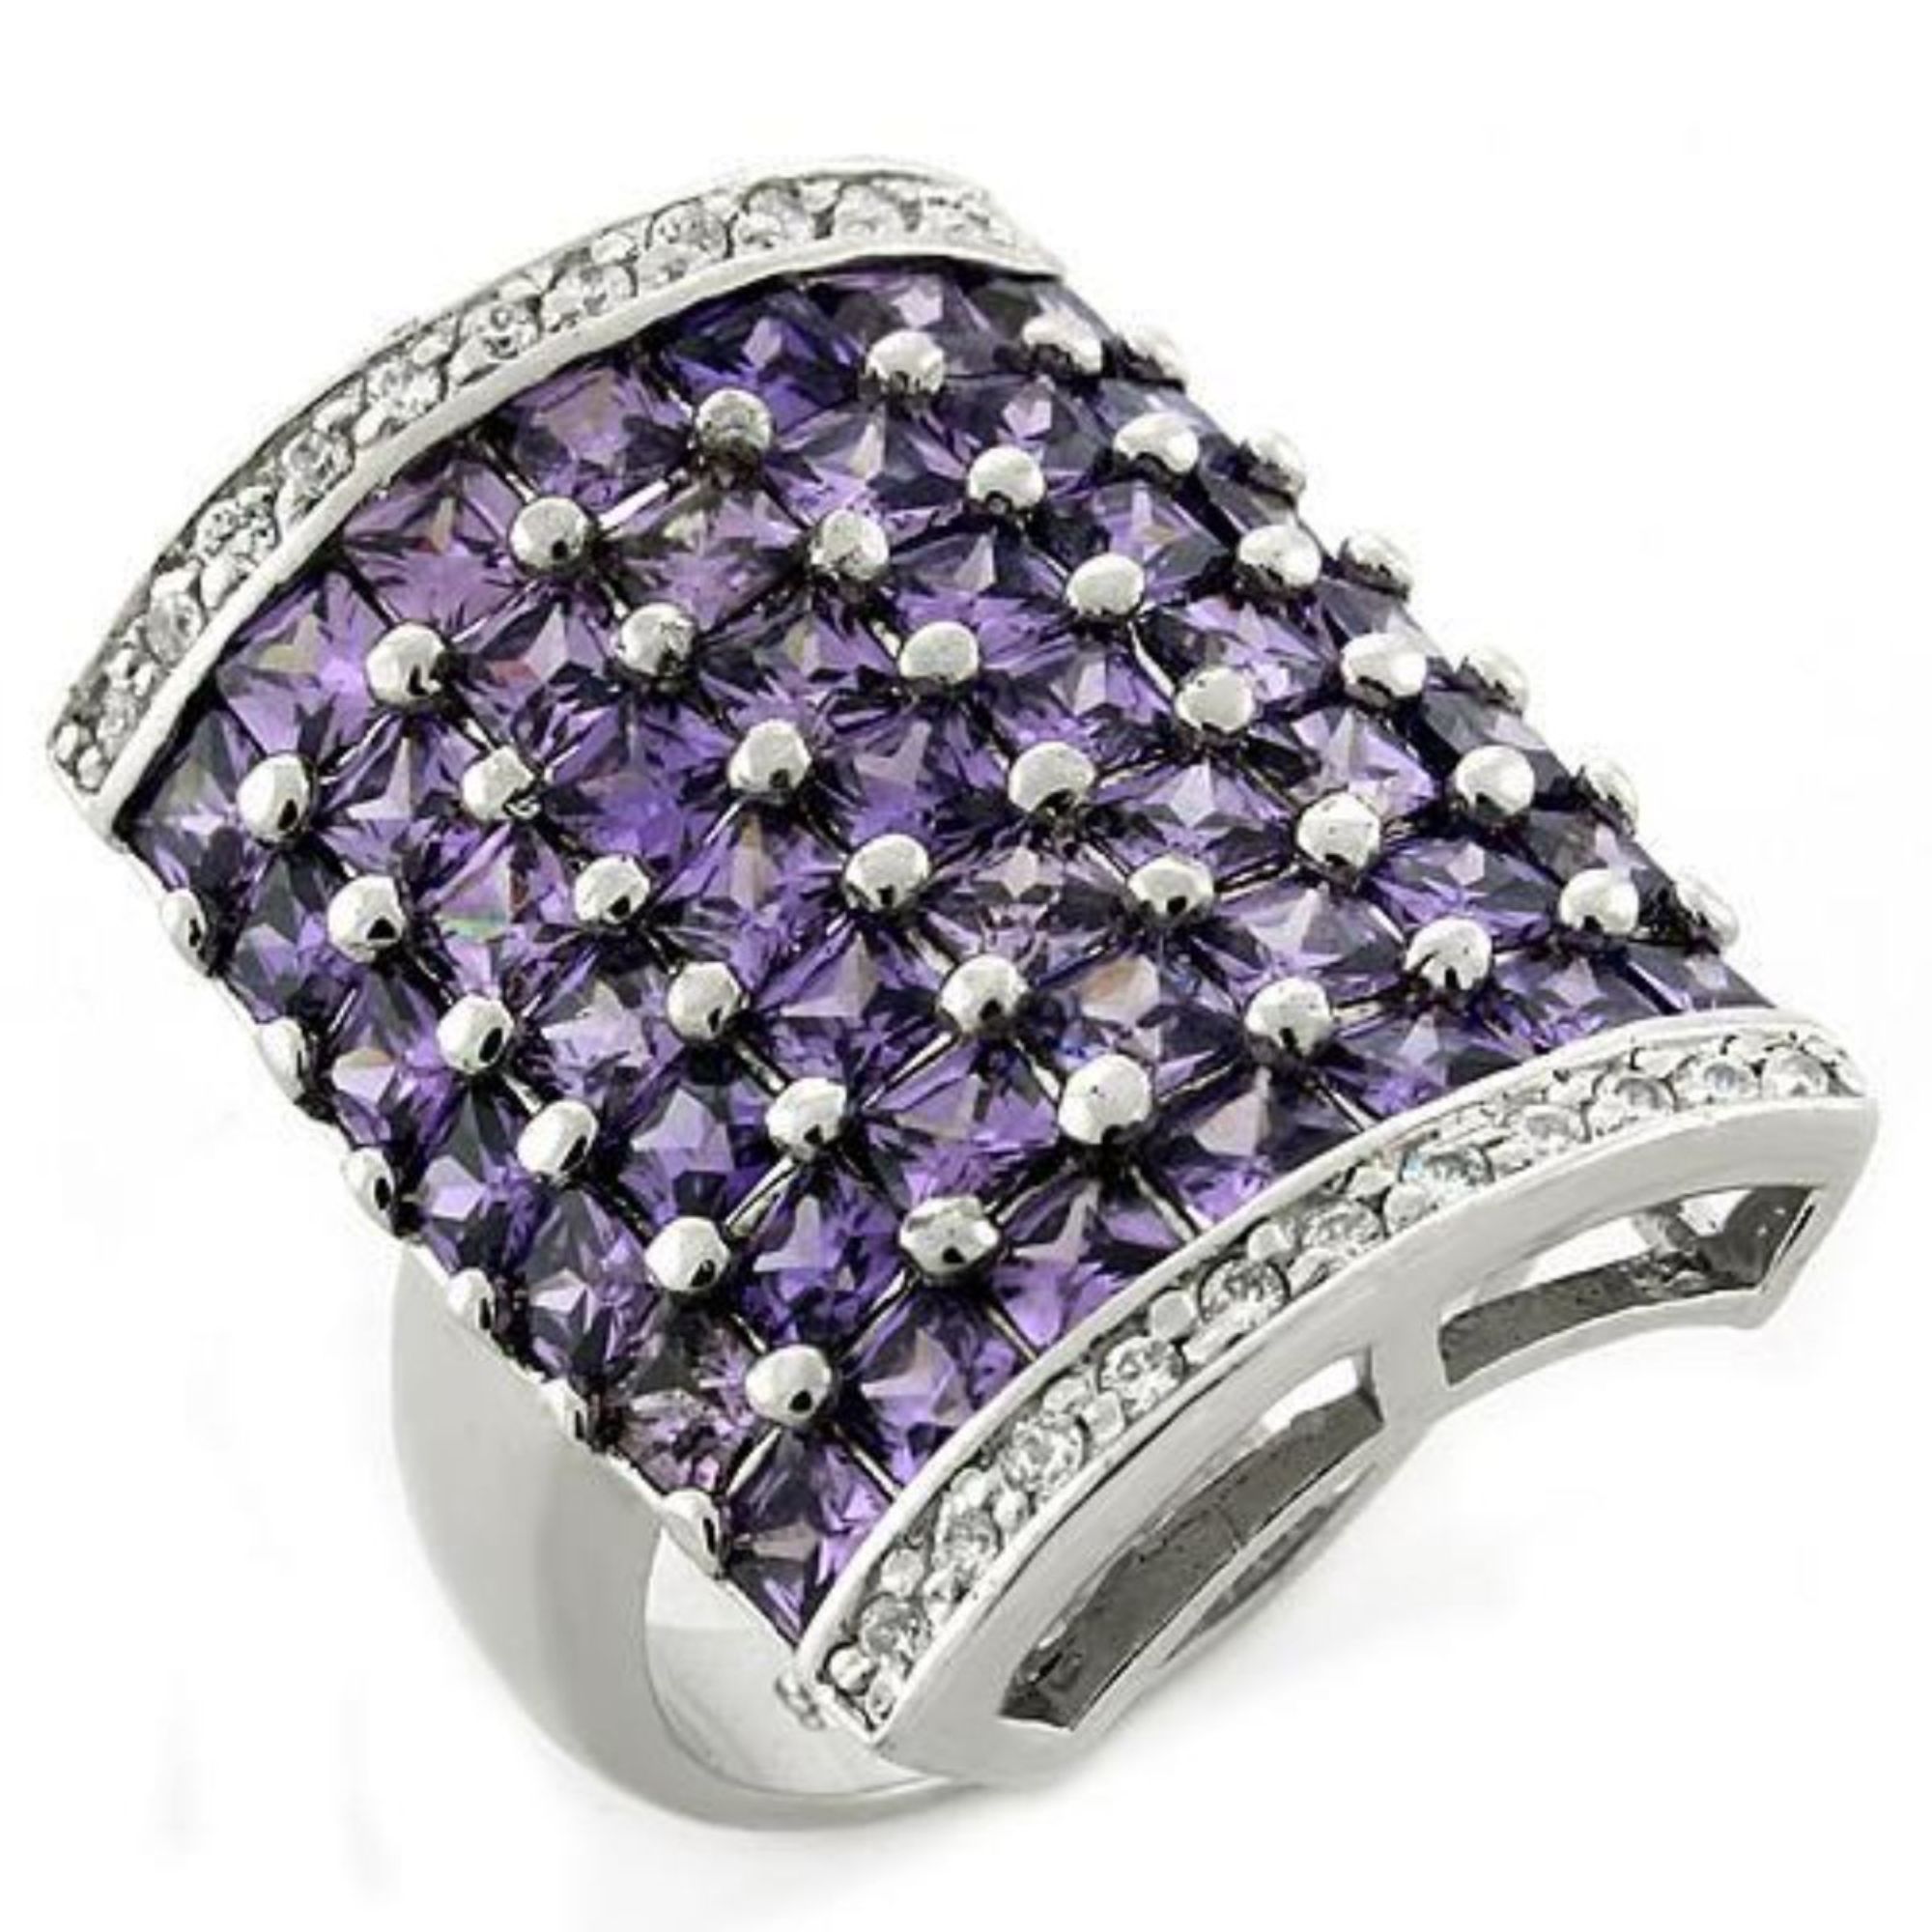 Luxe Jewelry Designs Women's Sterling Silver Ring with Amethyst Cubic Zirconia - Size 7